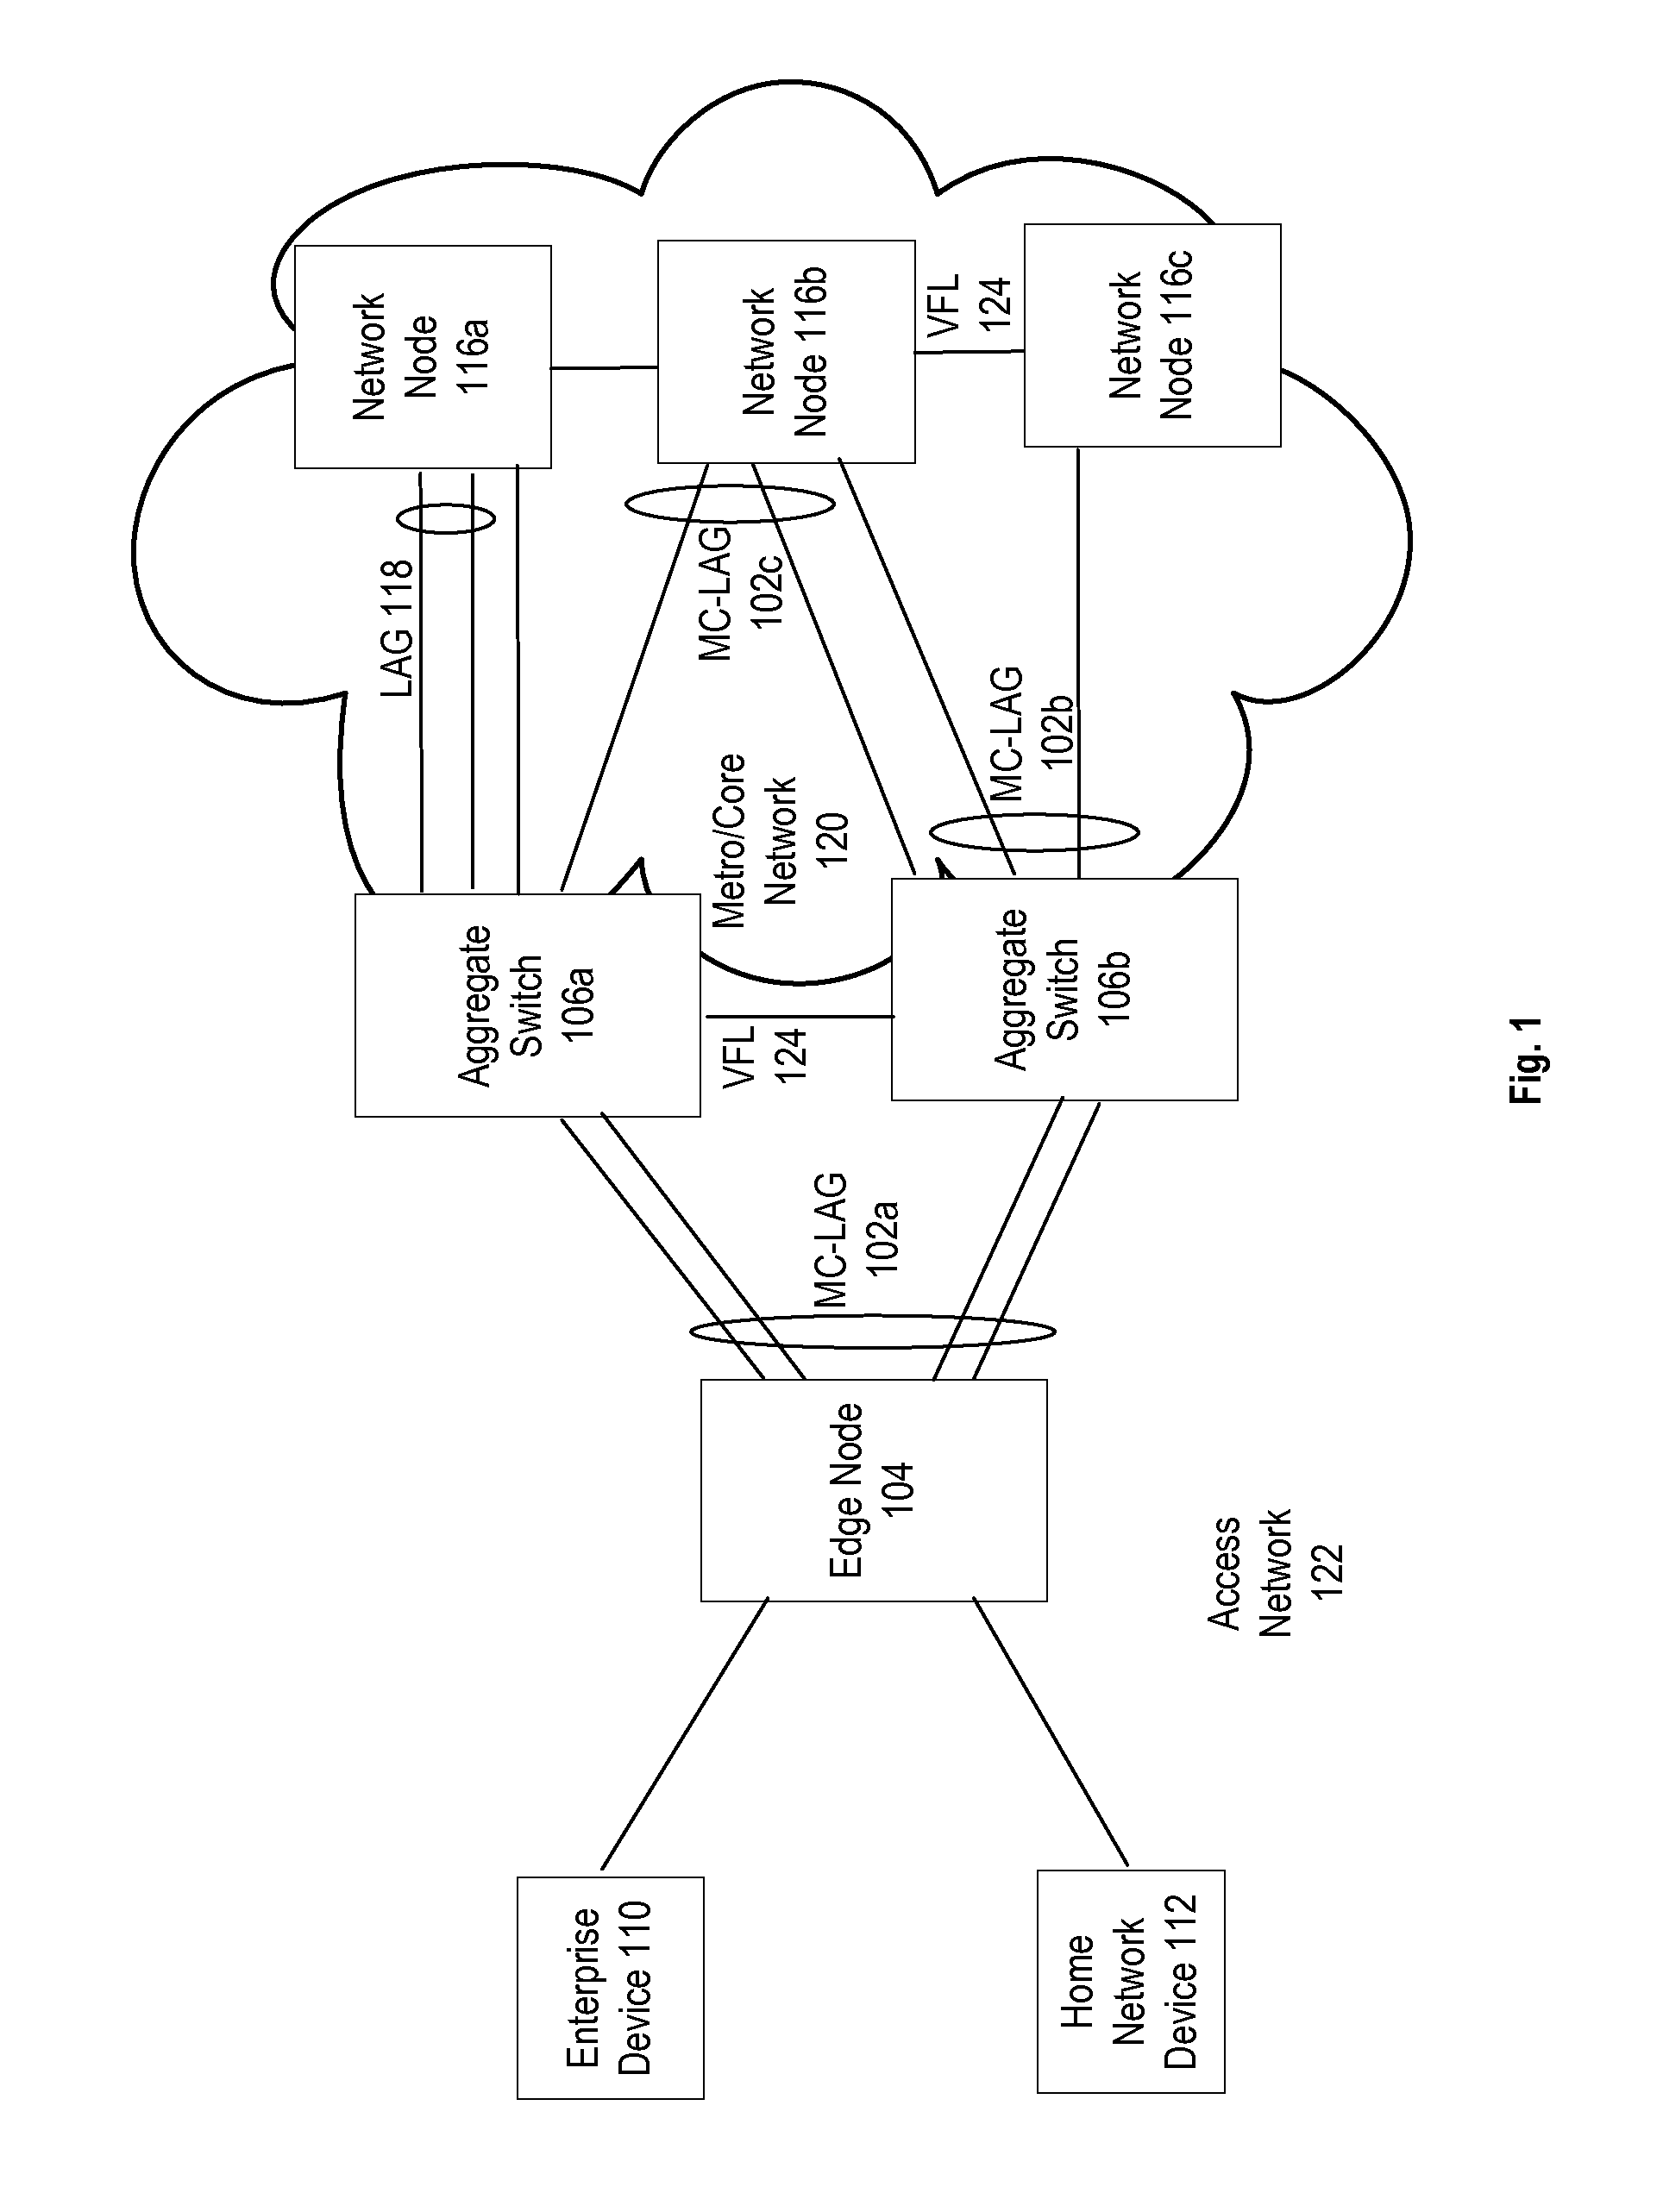 System and method for multi-chassis link aggregation